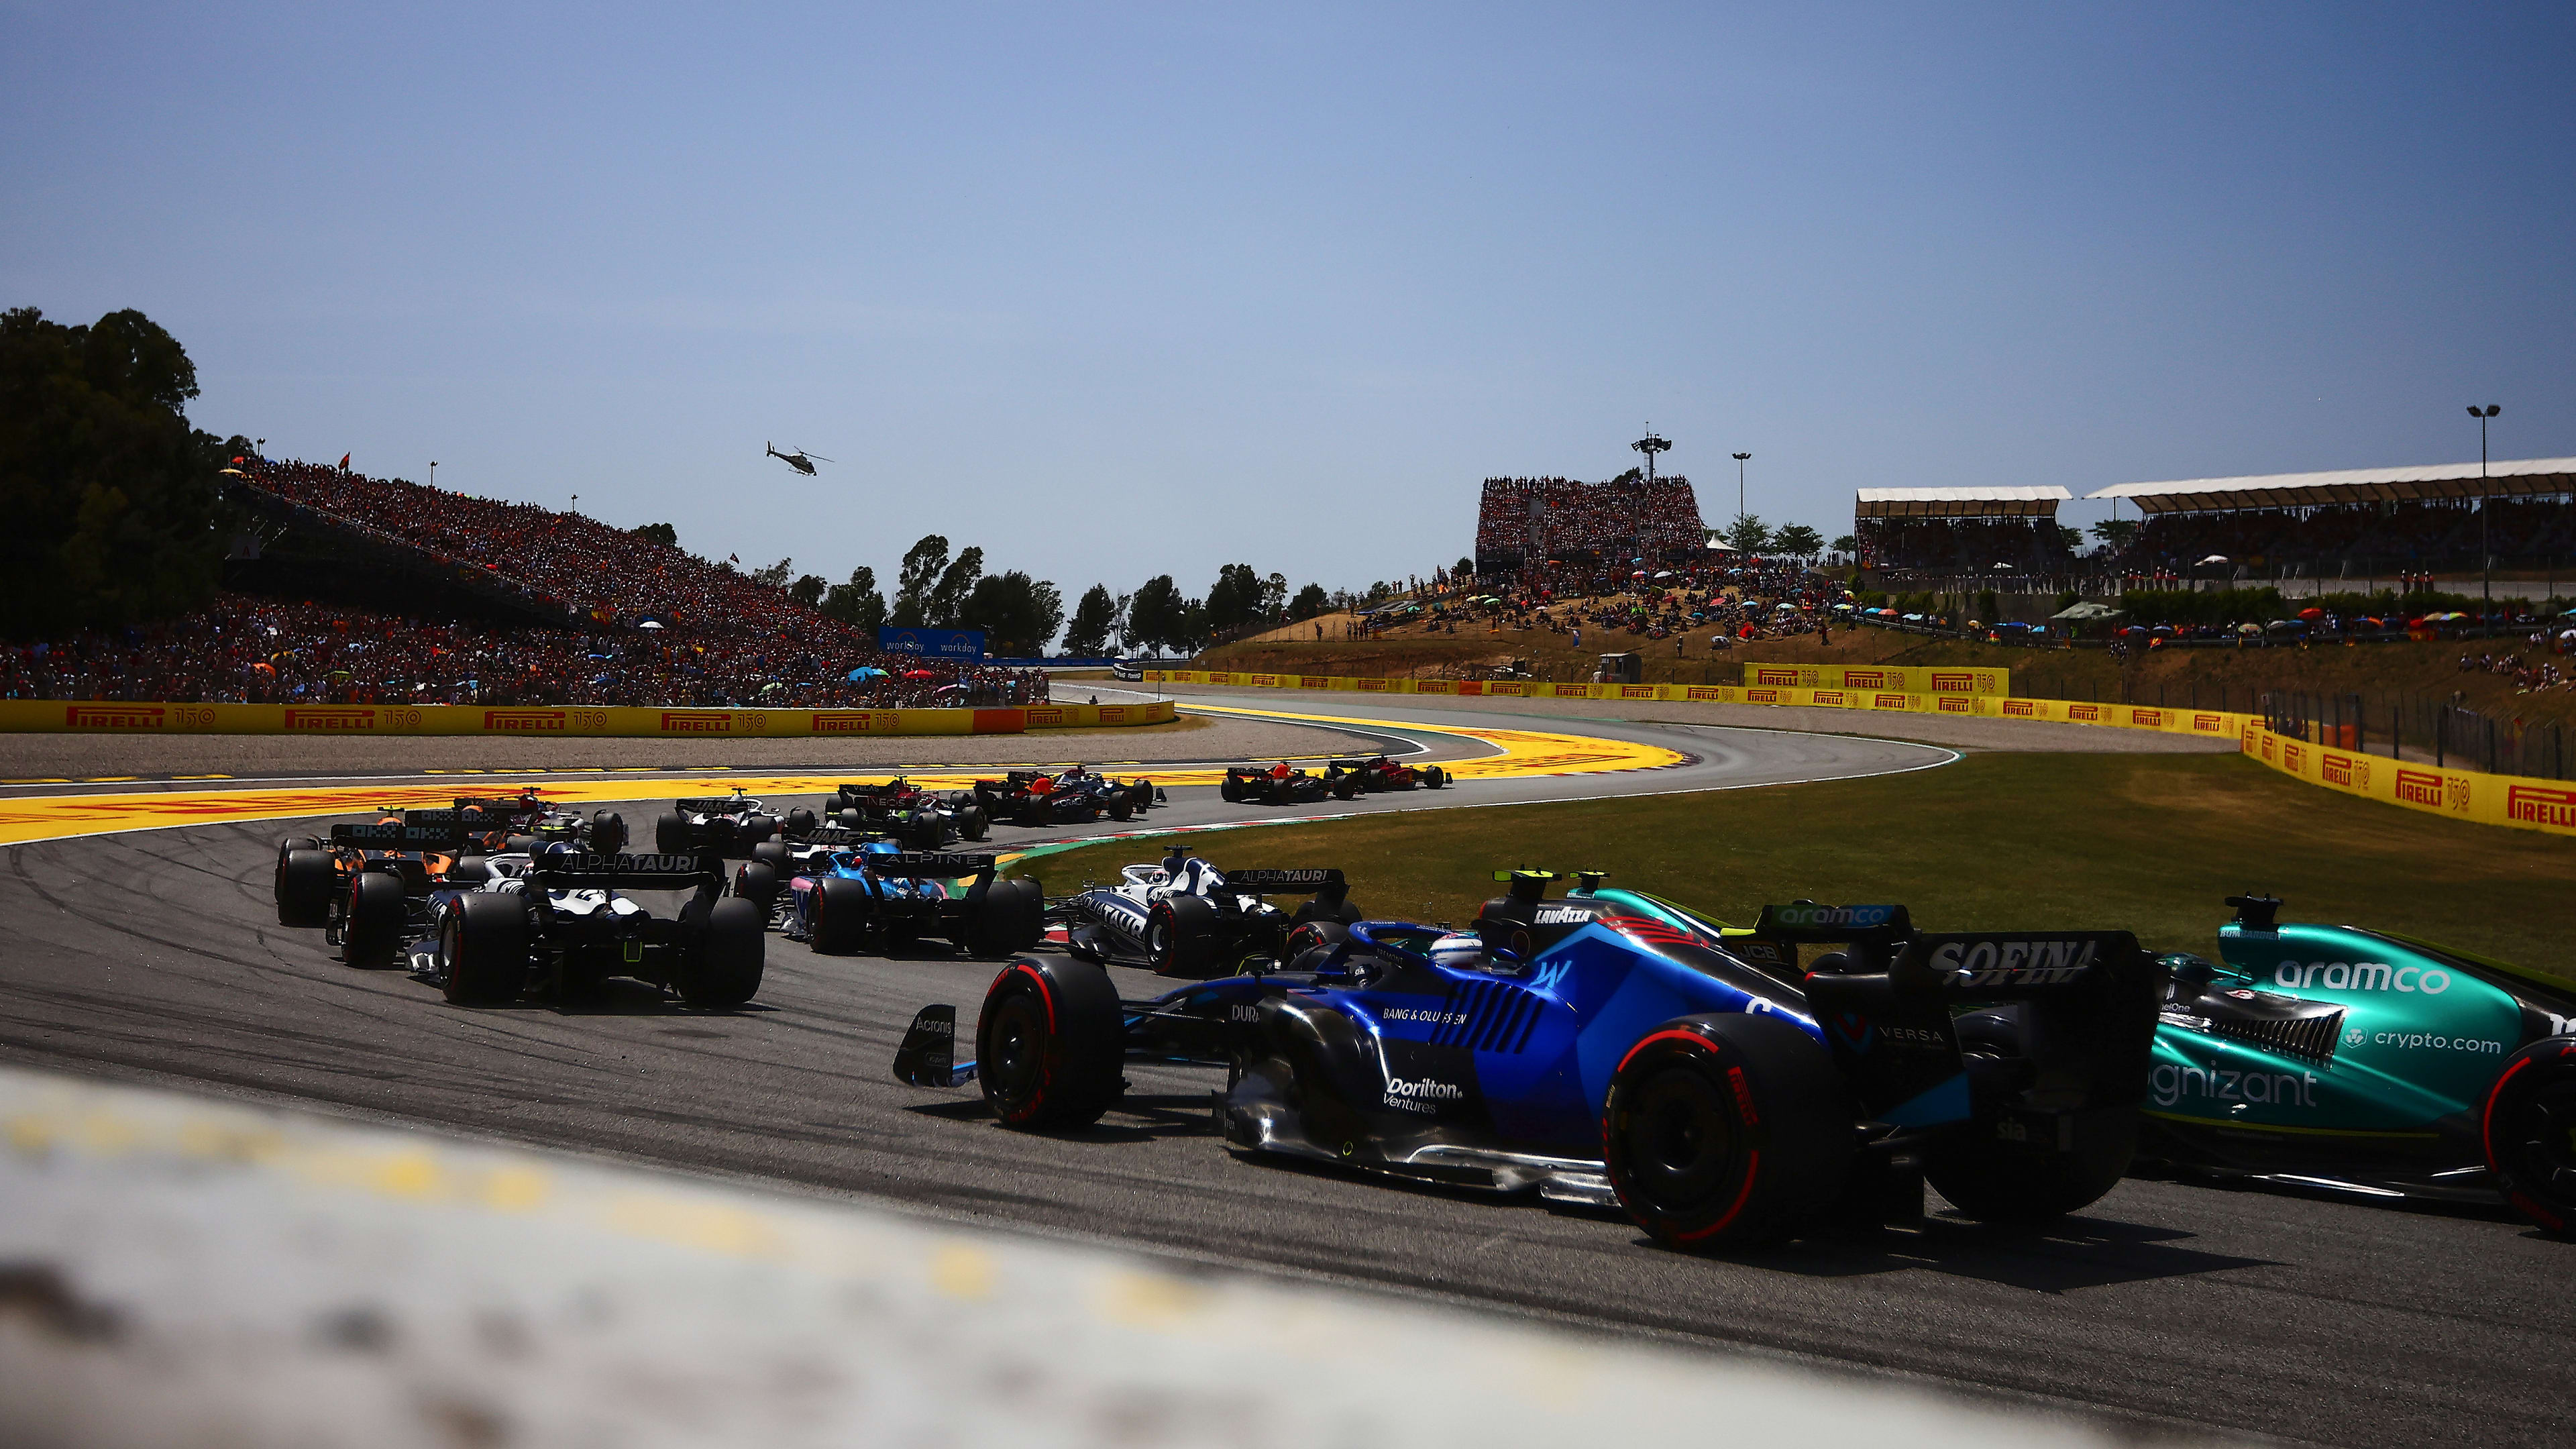 ITS RACE WEEK 5 storylines were excited about ahead of the Spanish Grand Prix Formula 1®